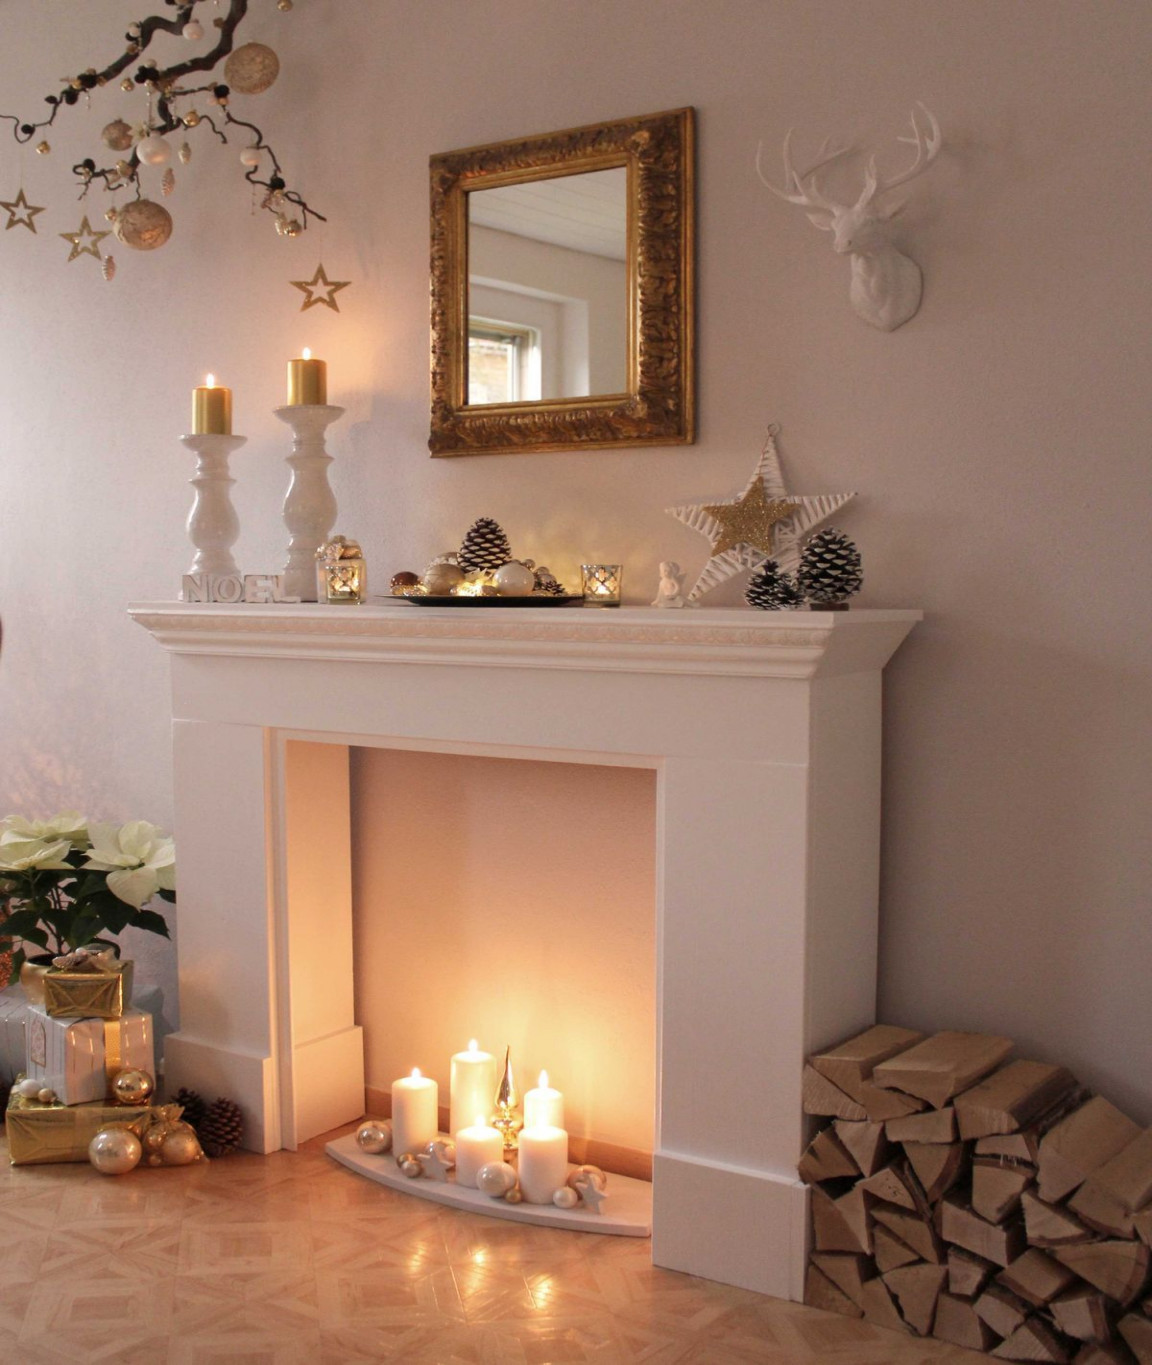 Decorating Around A Fireplace Elegant Christmas Mantel Decorations Luxe Millionnaire